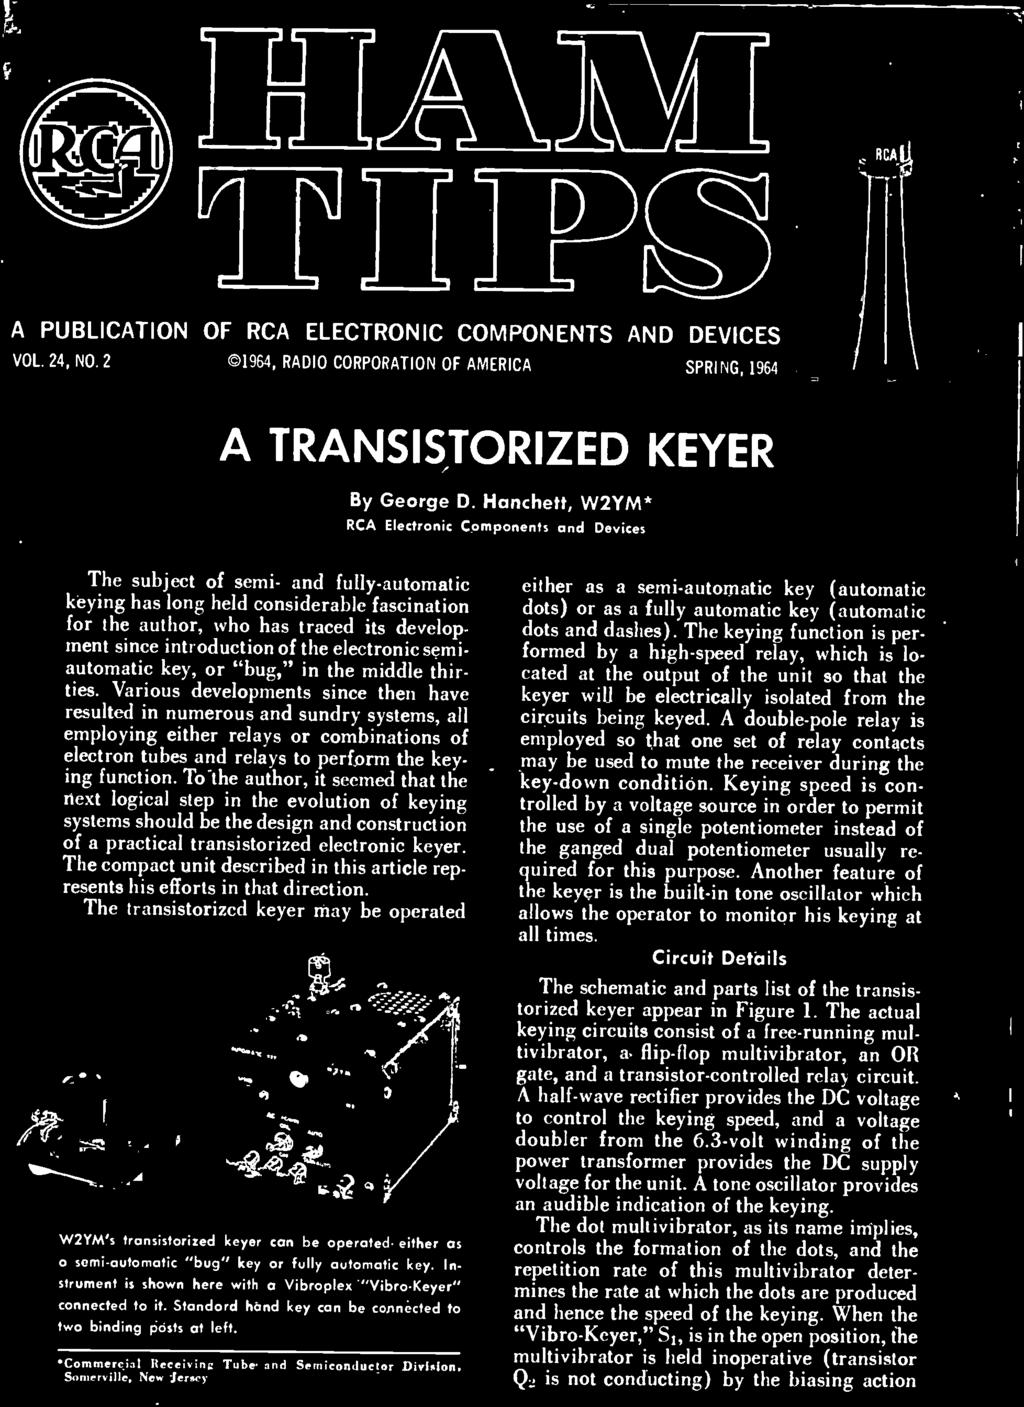 To -the author, it seemed that the next logical step in the evolution of keying systems should be the design and construction of a practical transistorized electronic keyer.